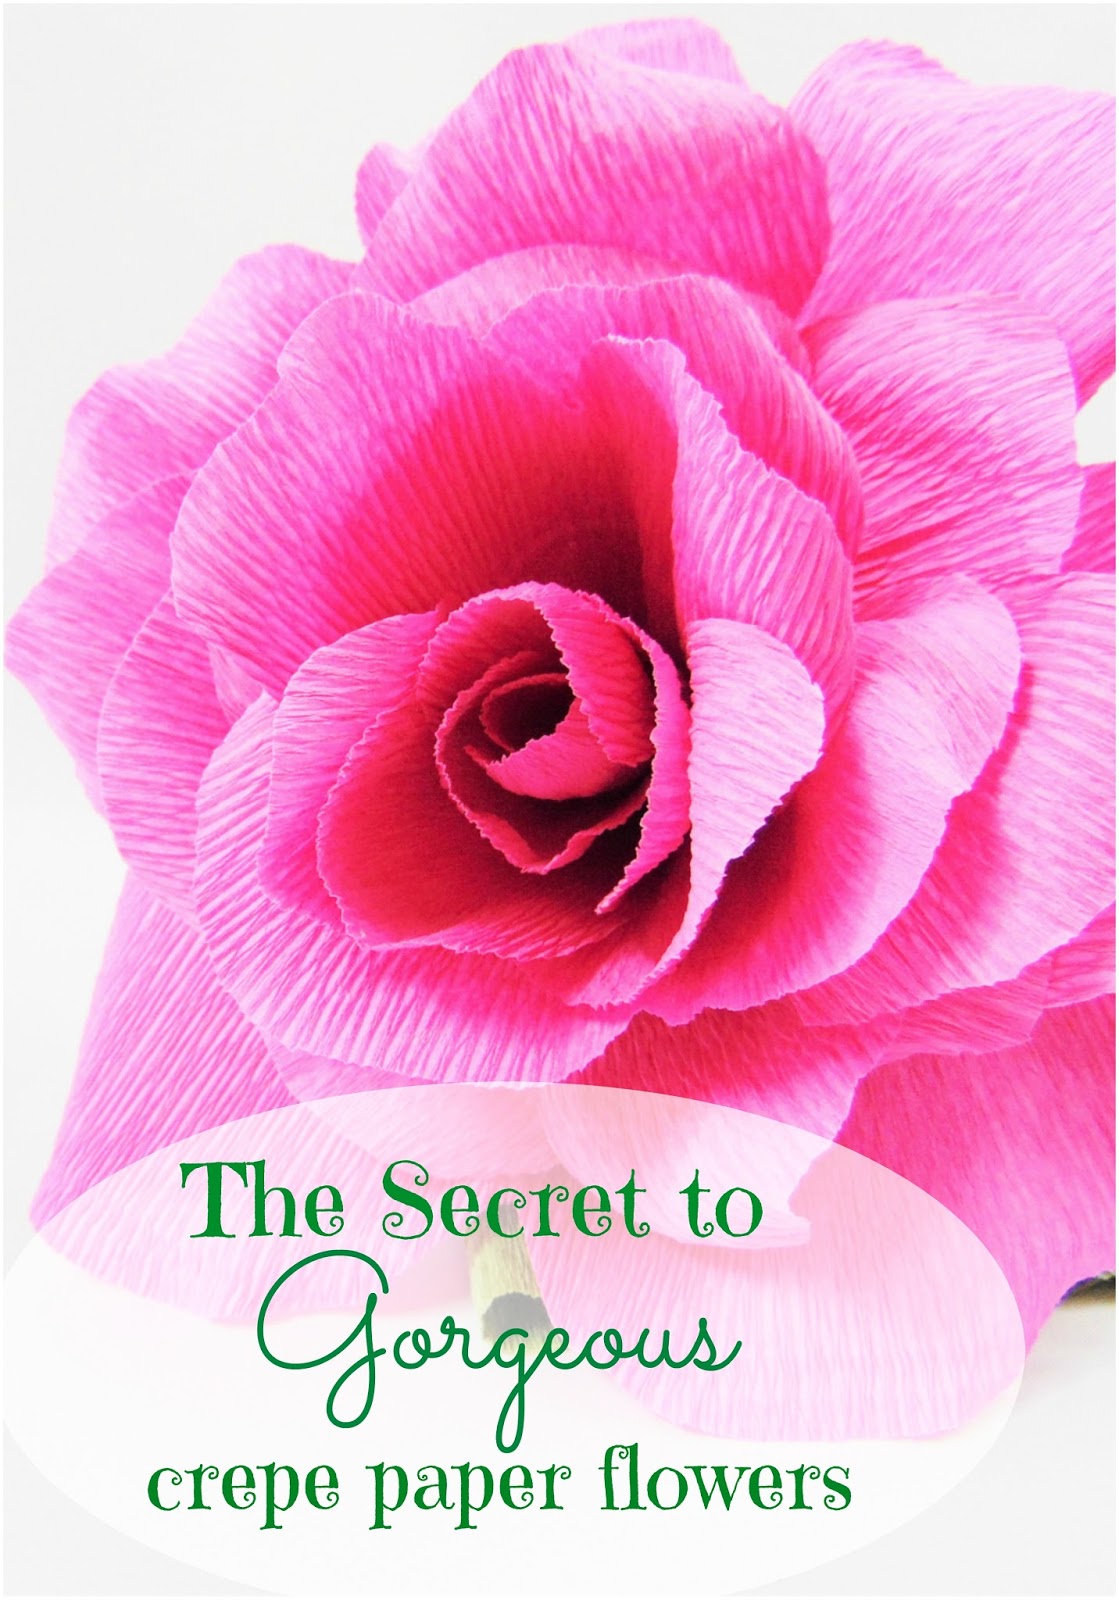 The Secret to Perfect Crepe Paper Flowers - Catching Colorflies